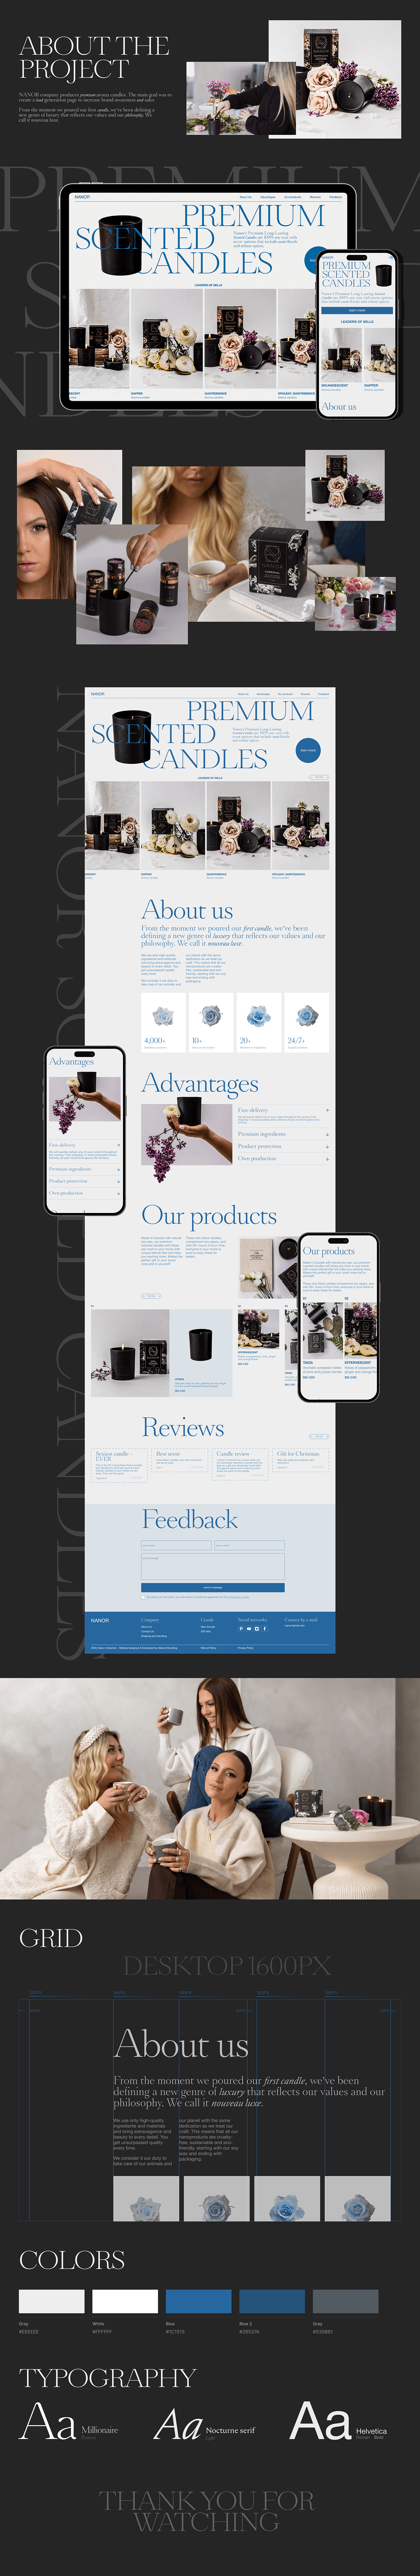 redesign Website UI/UX Figma candles candle soy wax